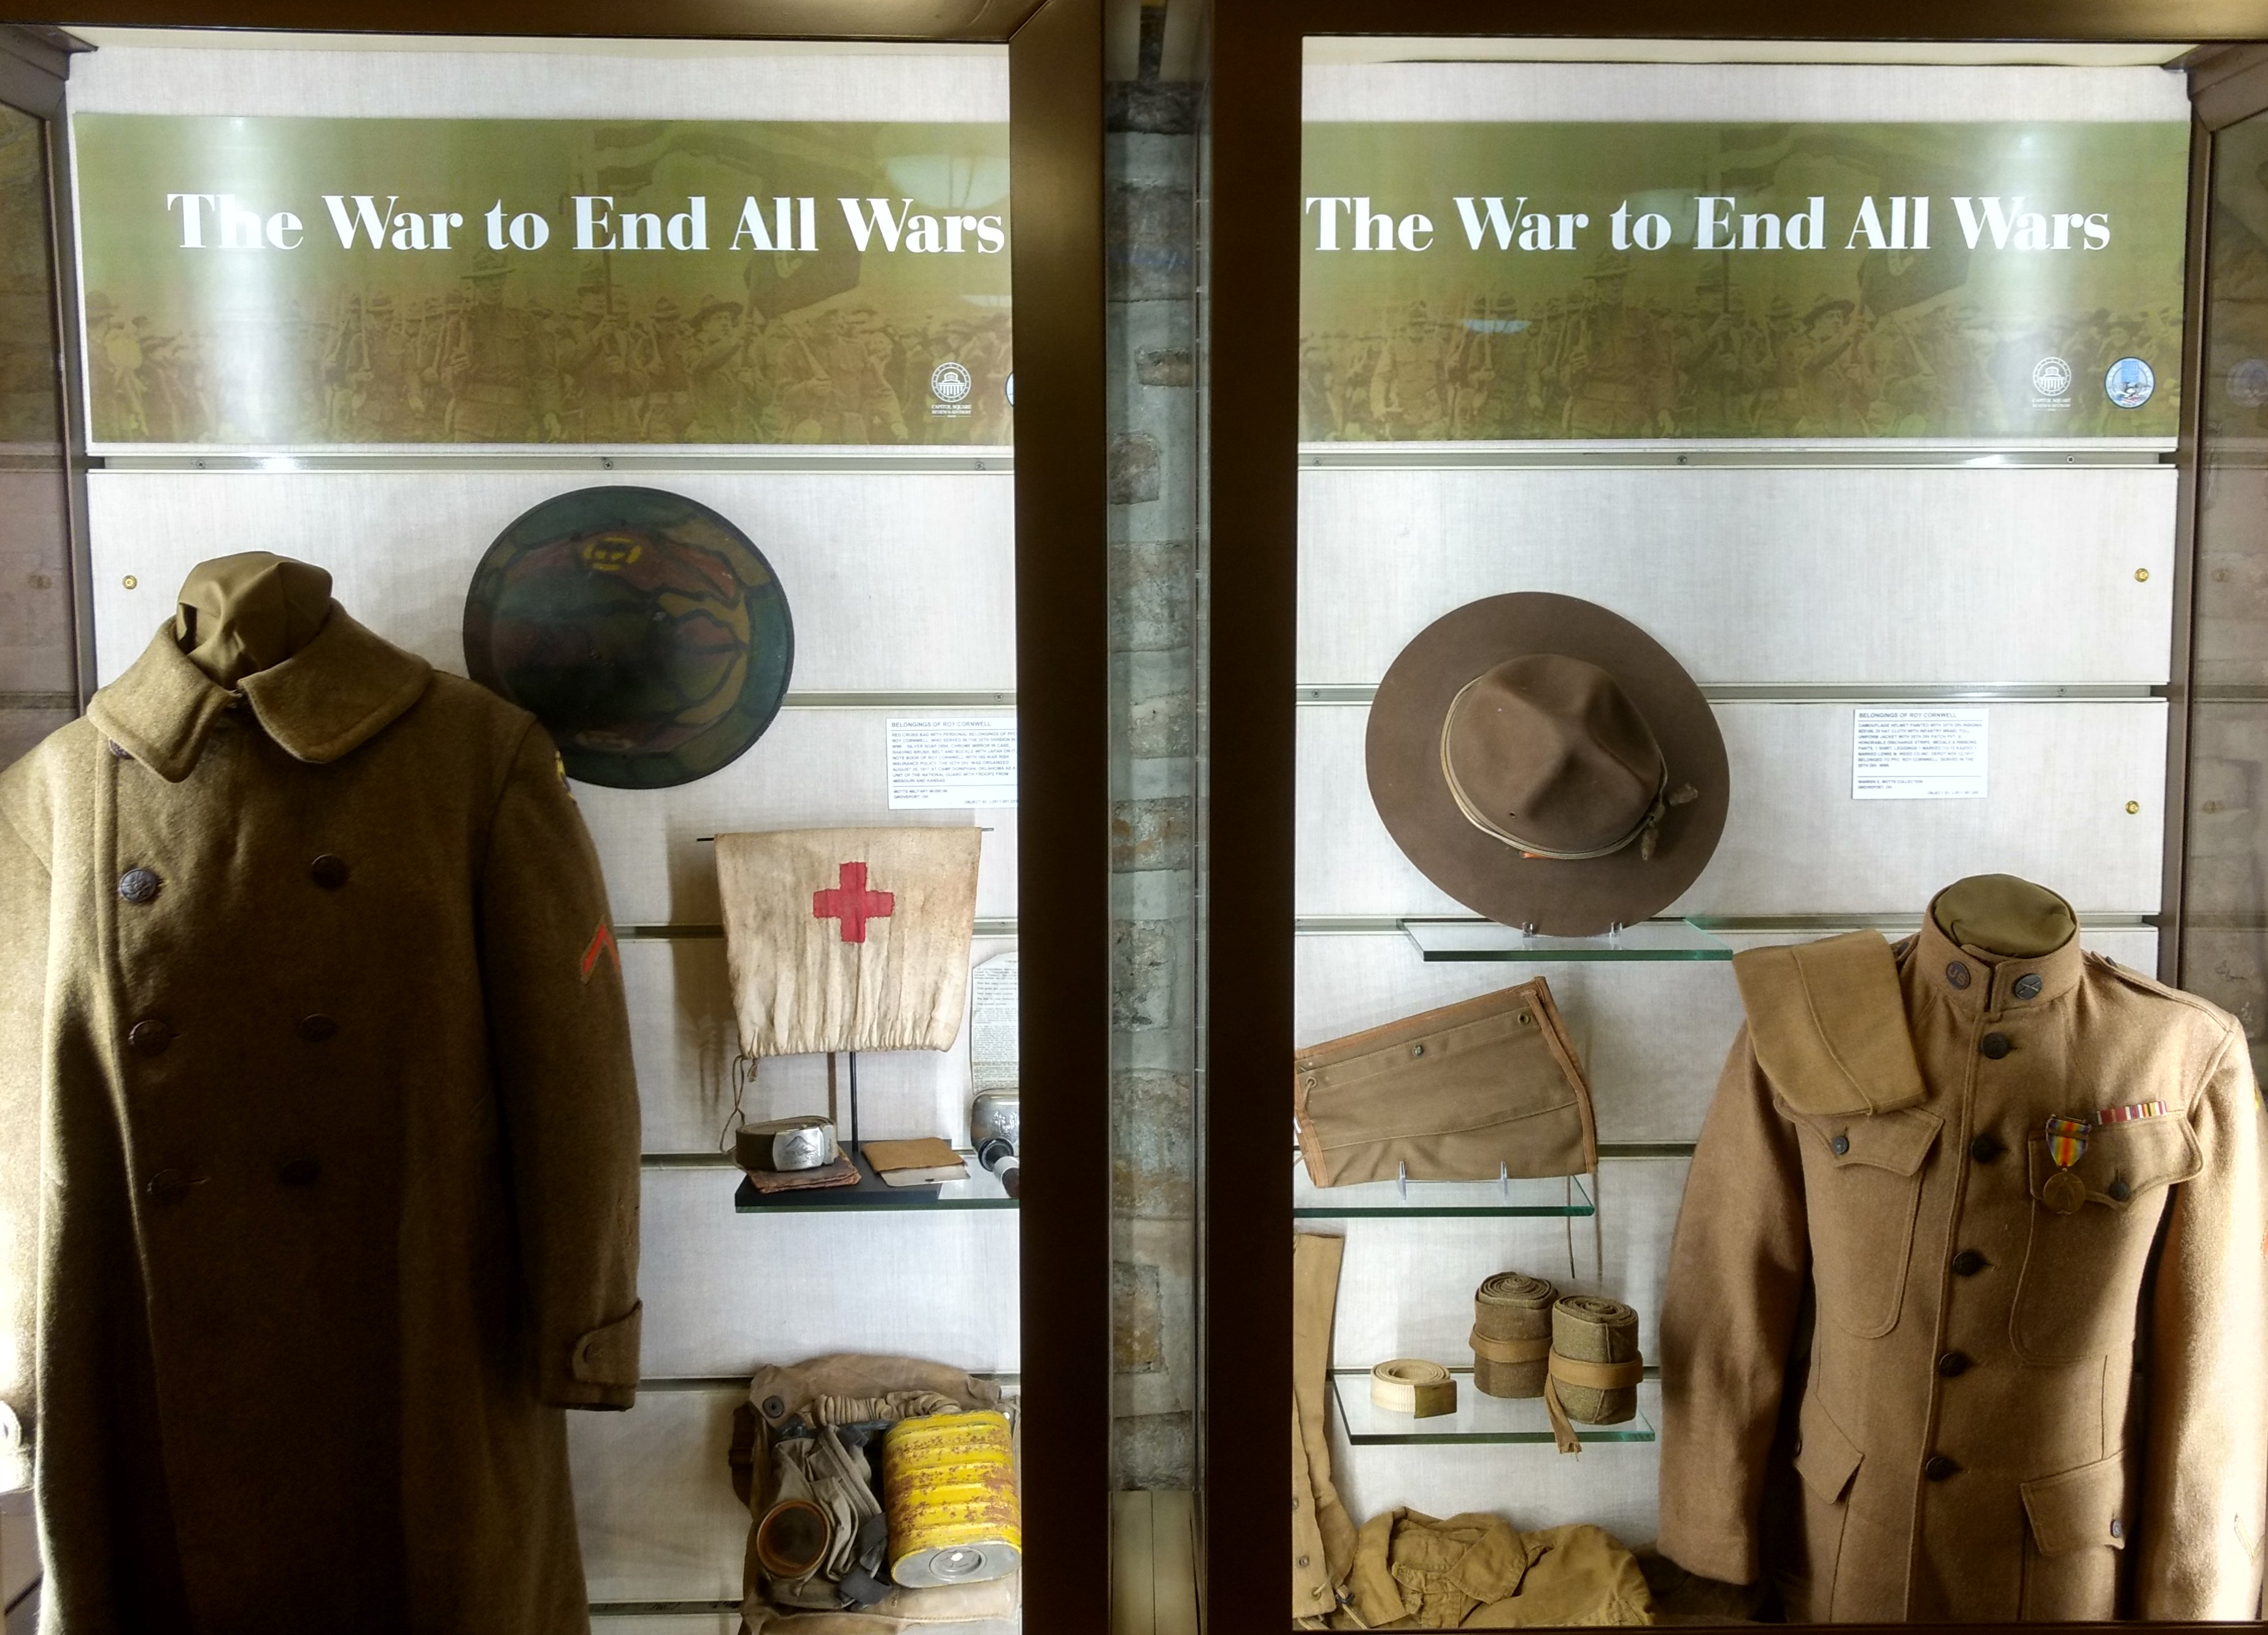 Showcase in a museum "The war to end all wars"